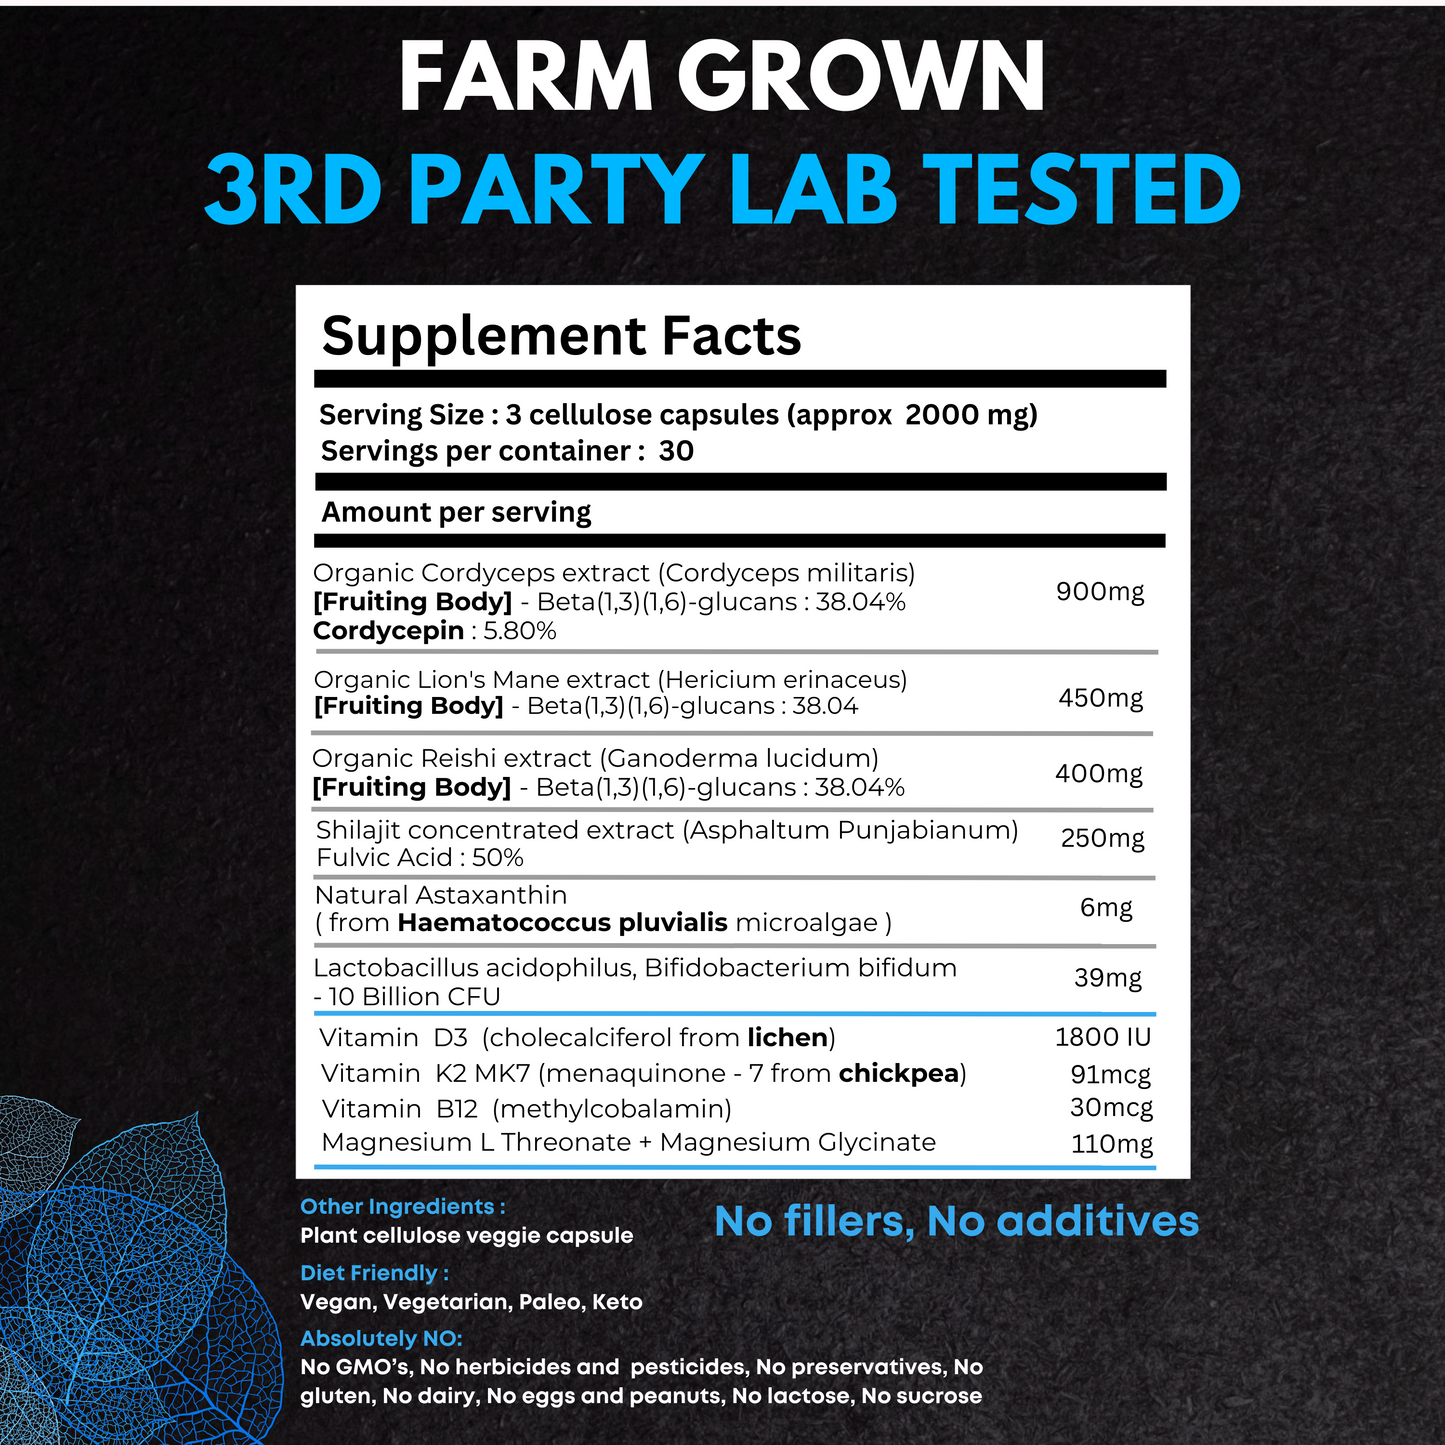 Flow State Mushroom Complex Synergized with Shilajit, Astaxanthin, Probiotics and Vitamins